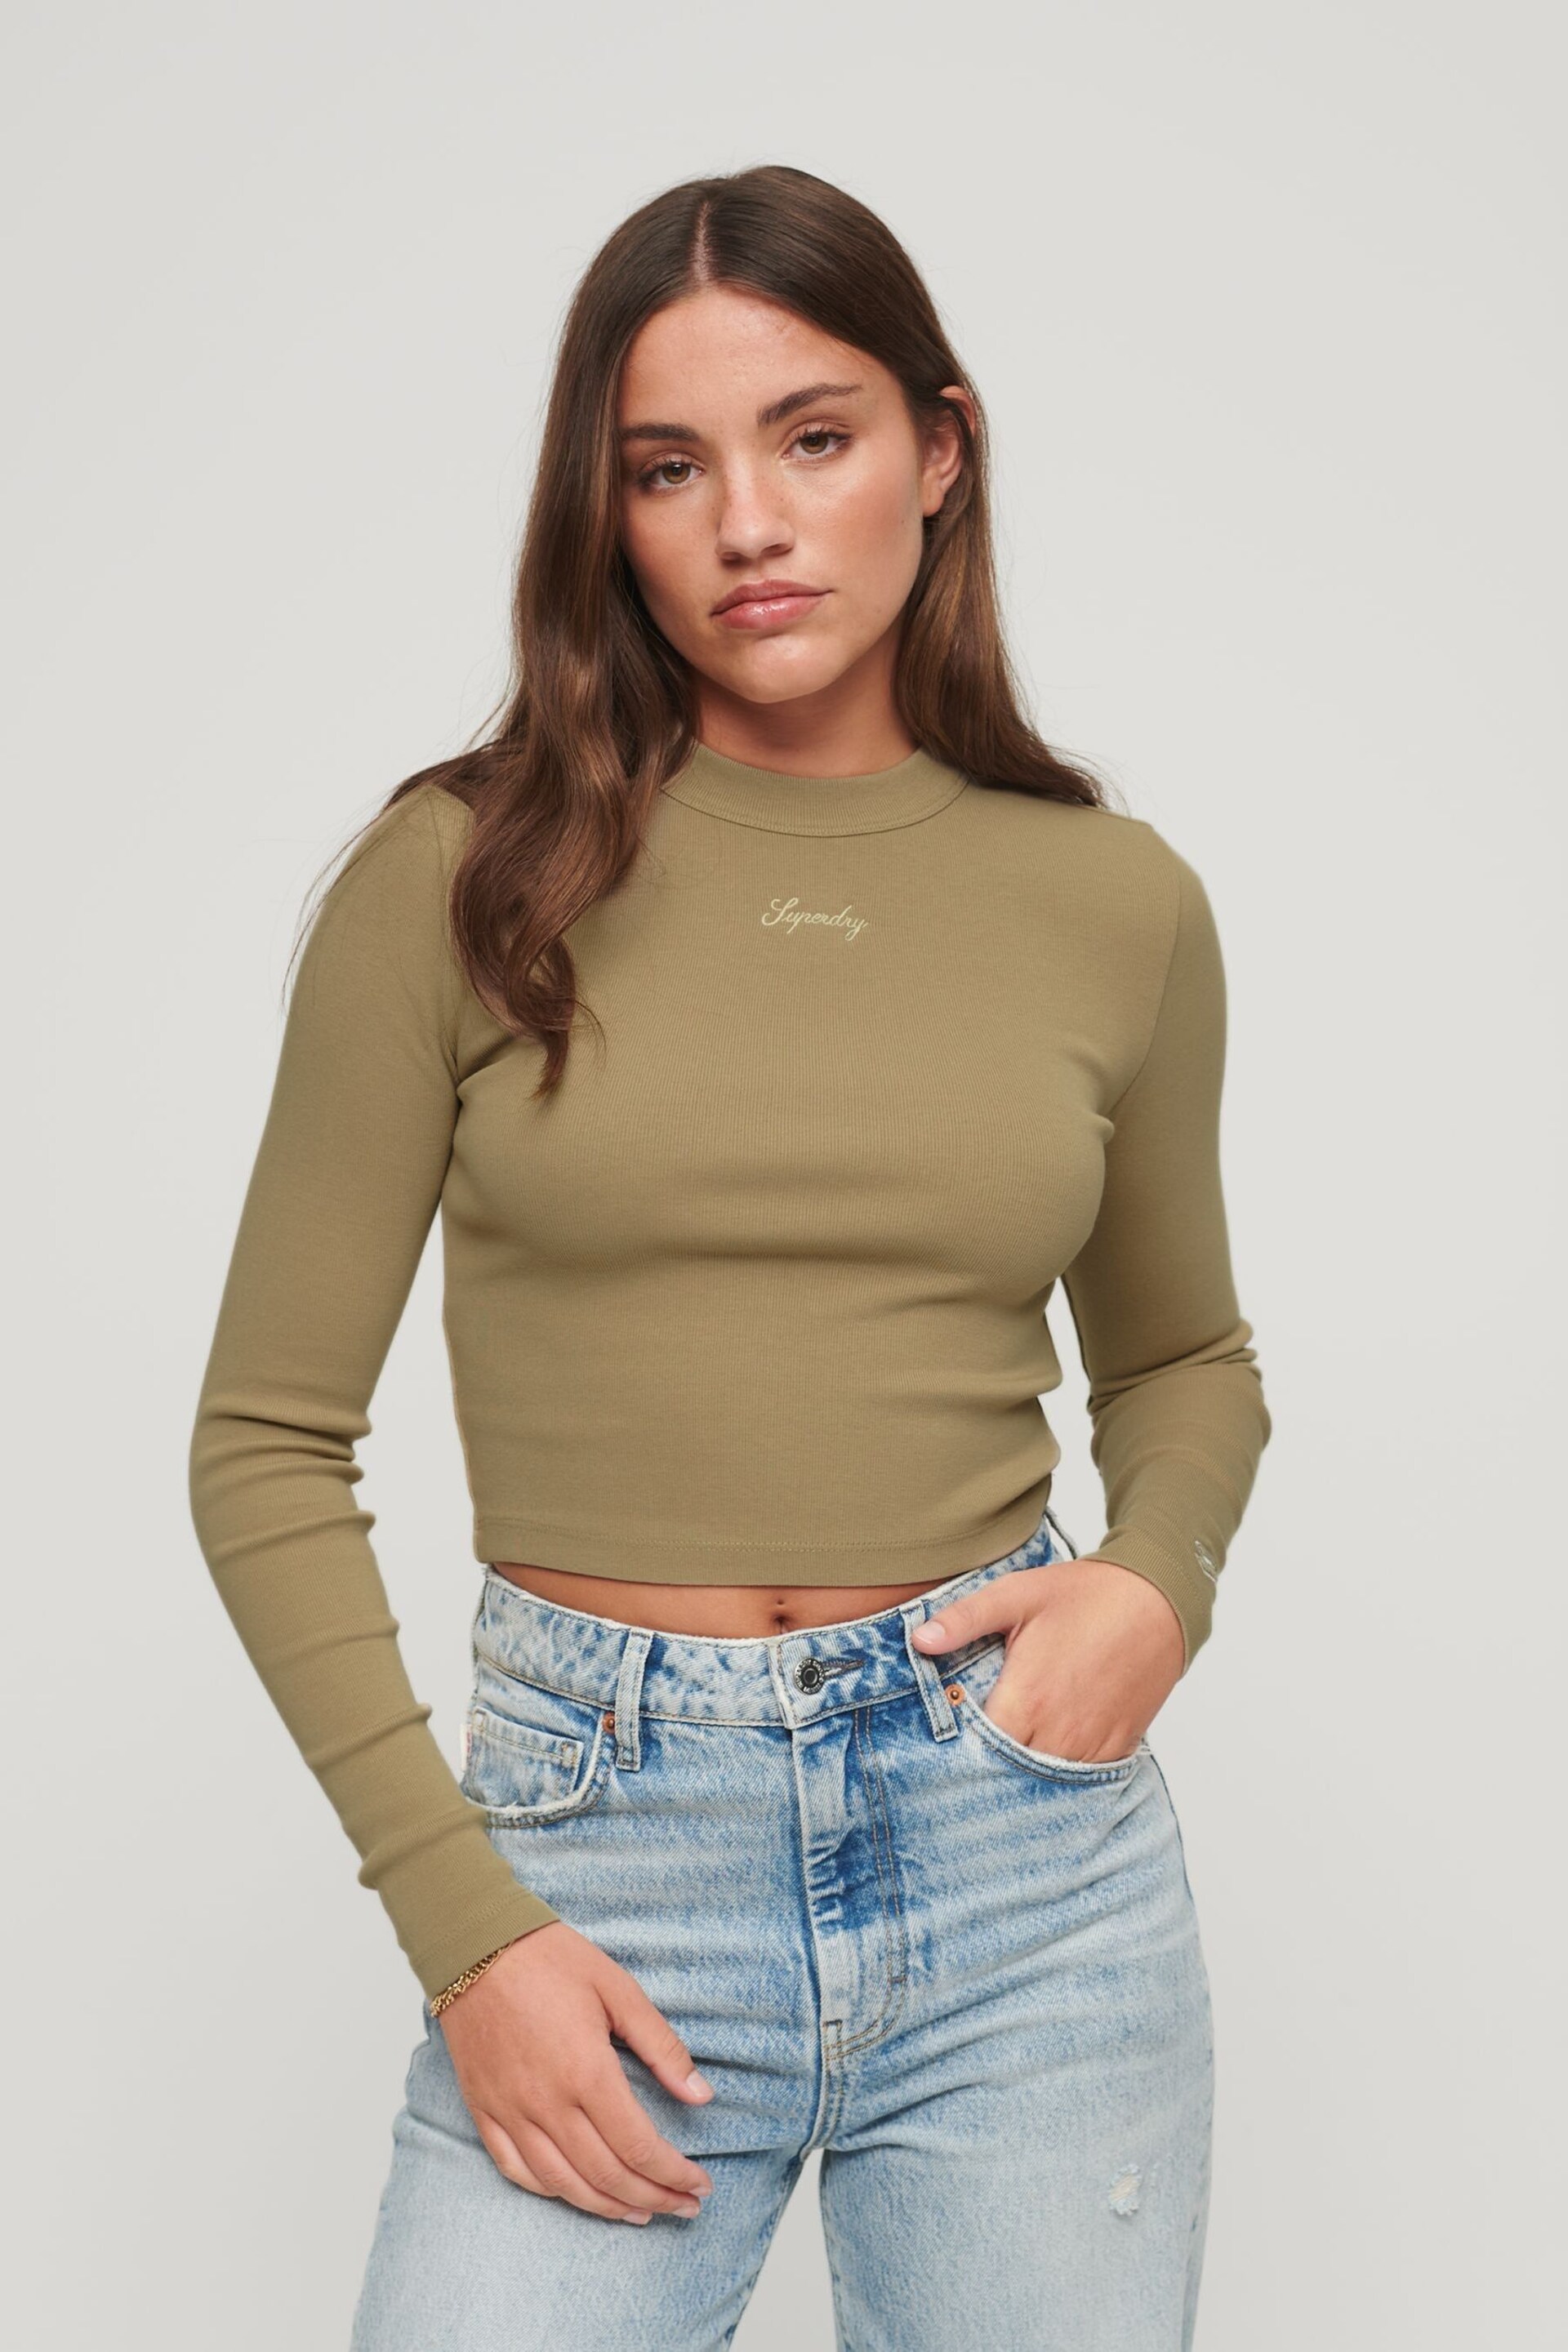 Superdry Green Rib Long Sleeve Fitted Top - Image 1 of 6